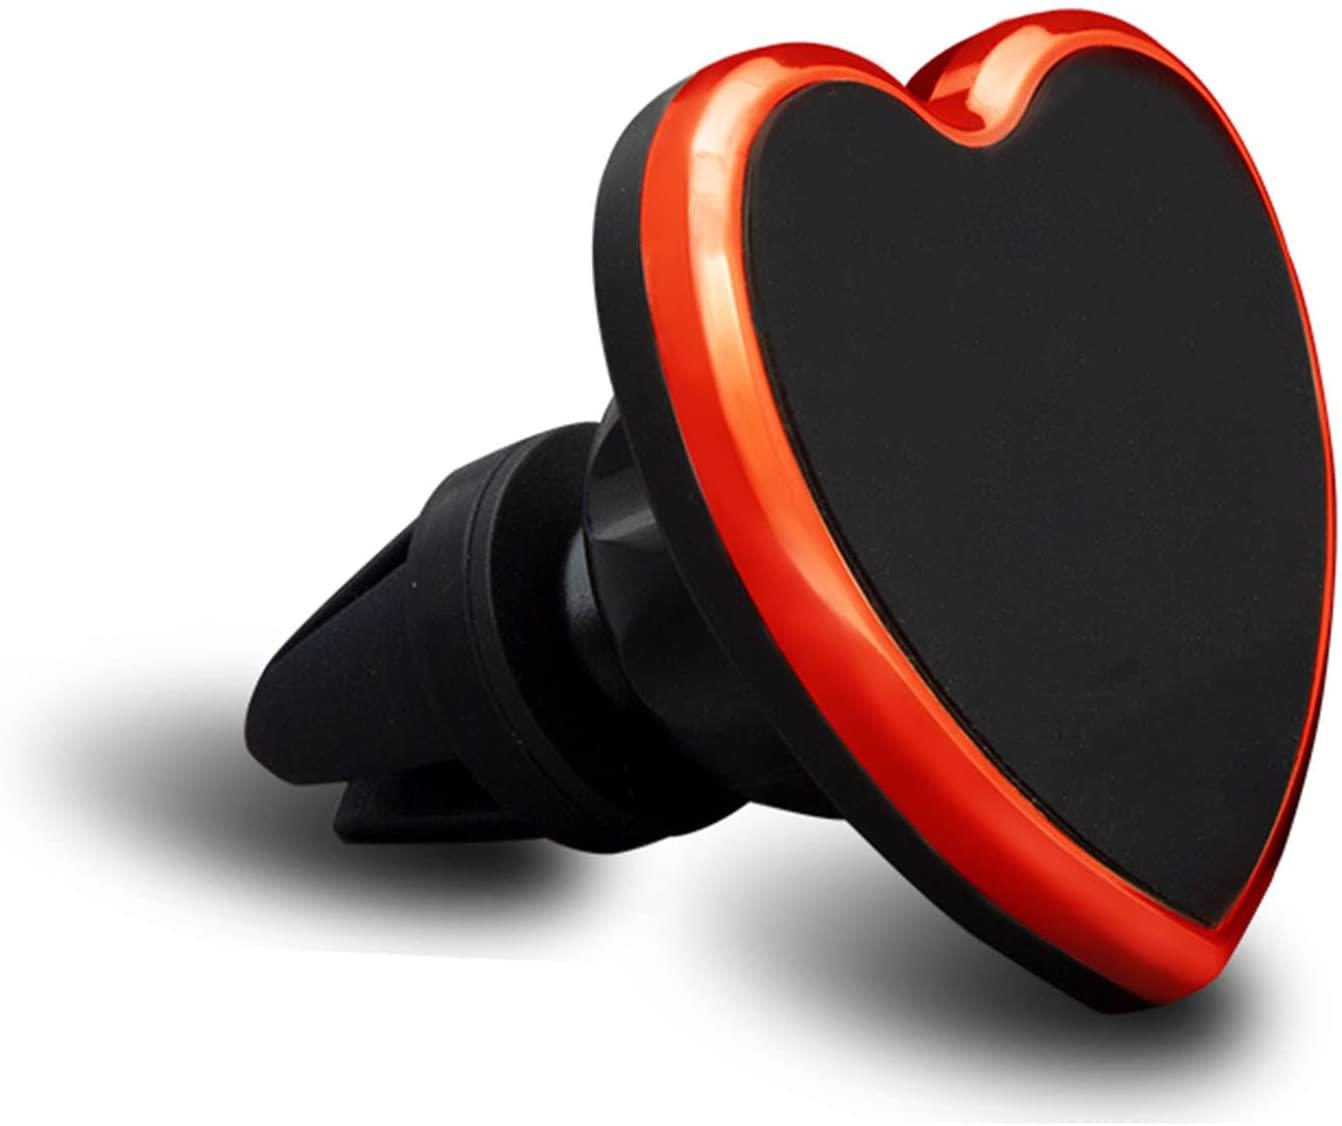 Aquarius Universal Magnetic Phone Car Mount – Red Heart Shaped Phone Holder with Firm Grip